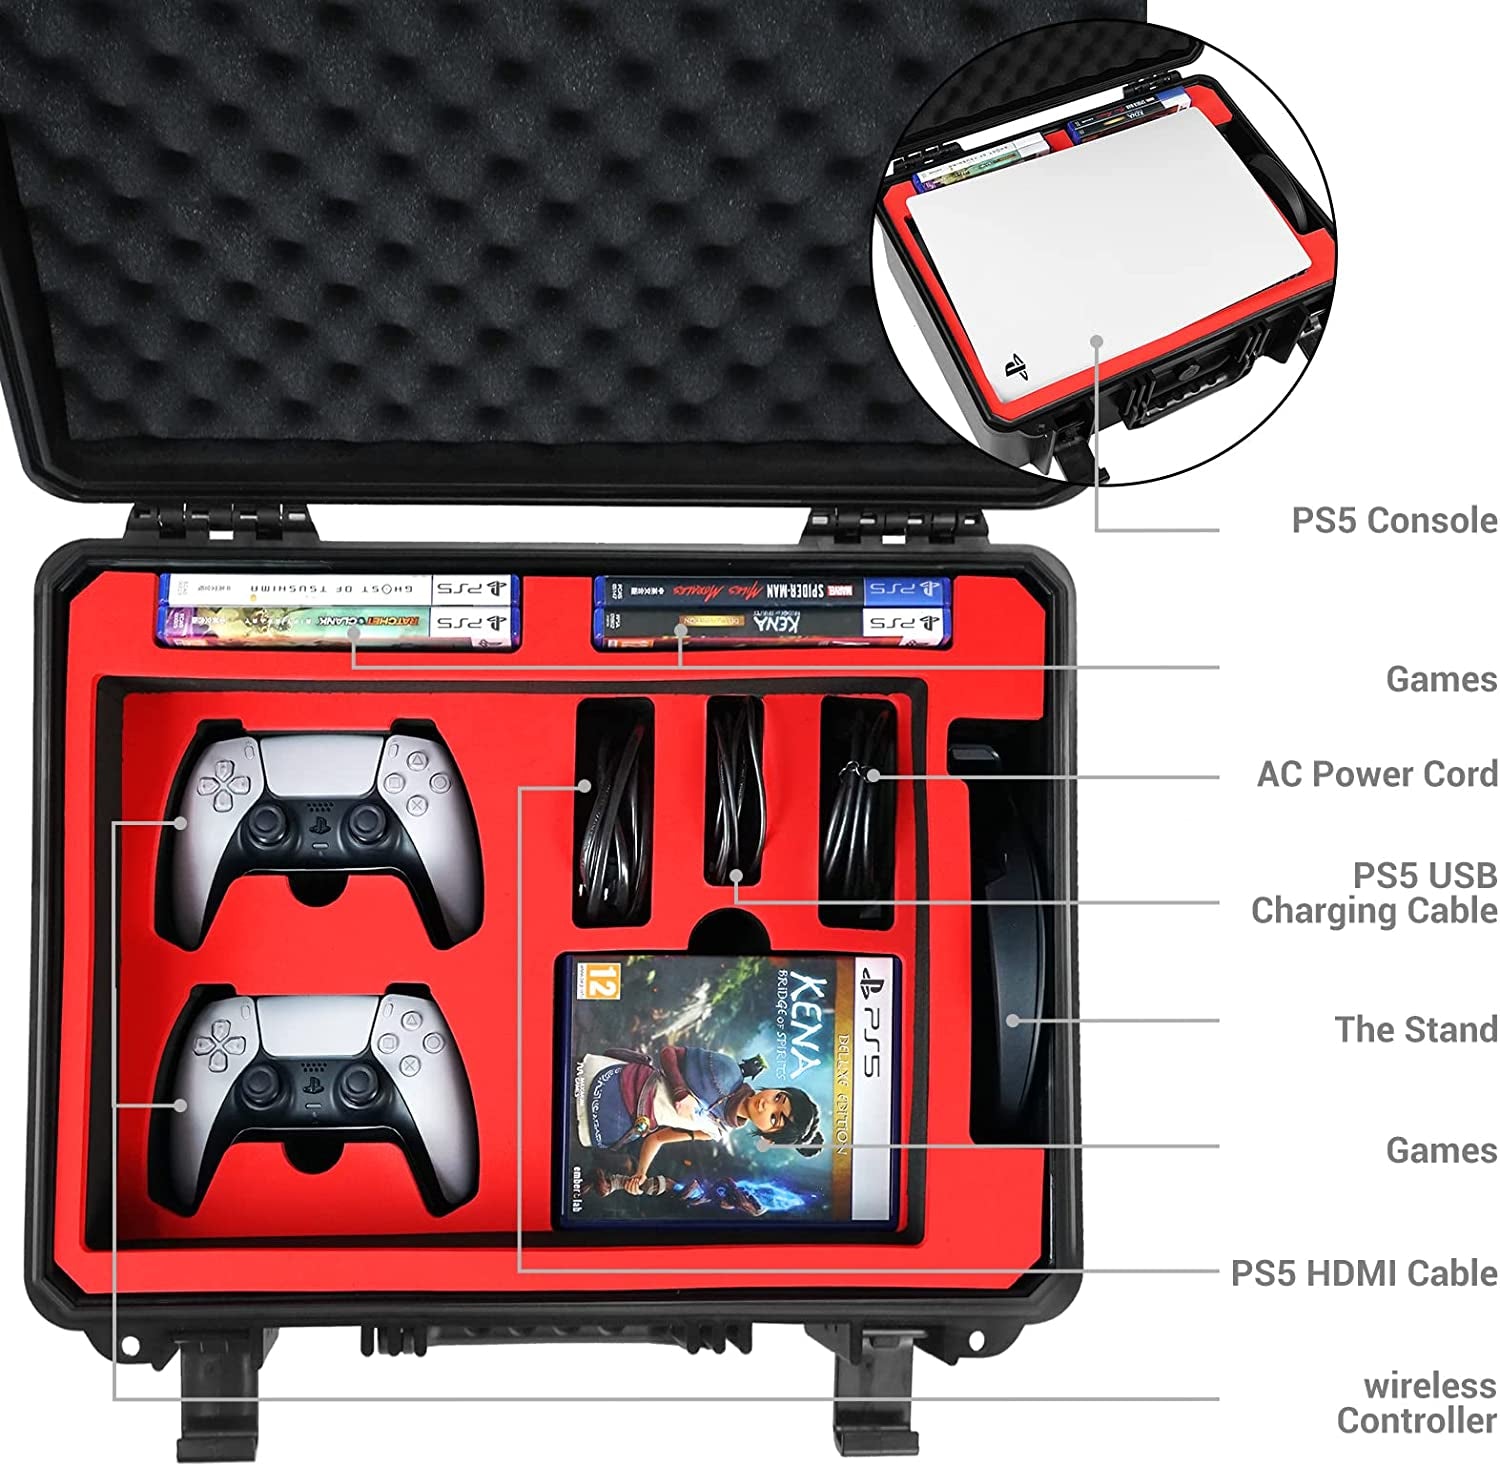 Premium Carrying Case for PS5 with Customized Foam -Travel Hard Case Fits Playstation 5, Console Controllers, Games, Cables